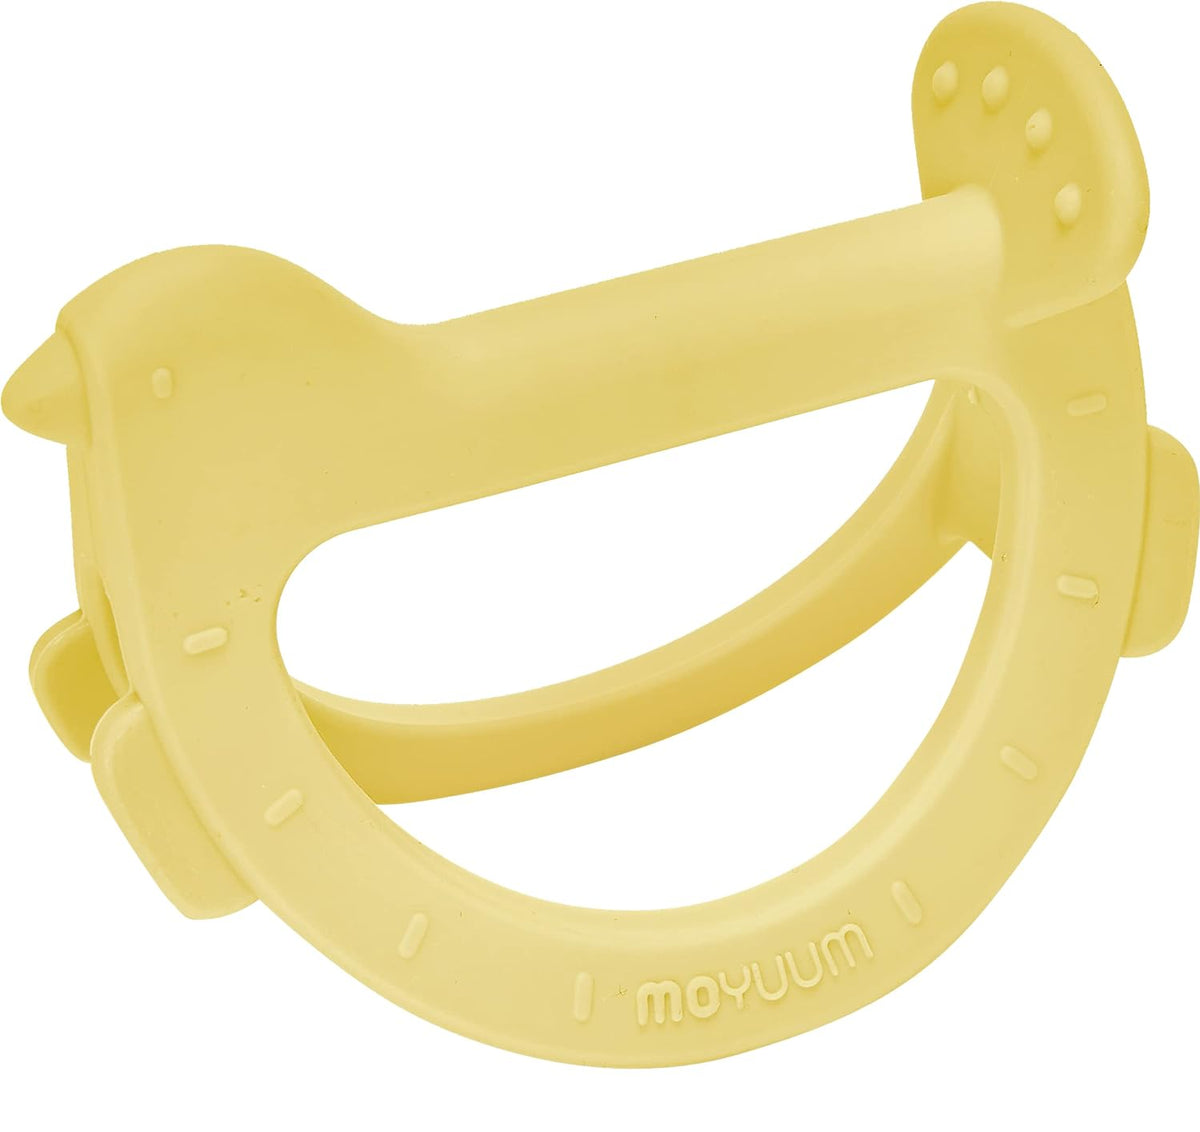 MOYUUM Gift Set Teether Swing Bird Red and Pony Yellow